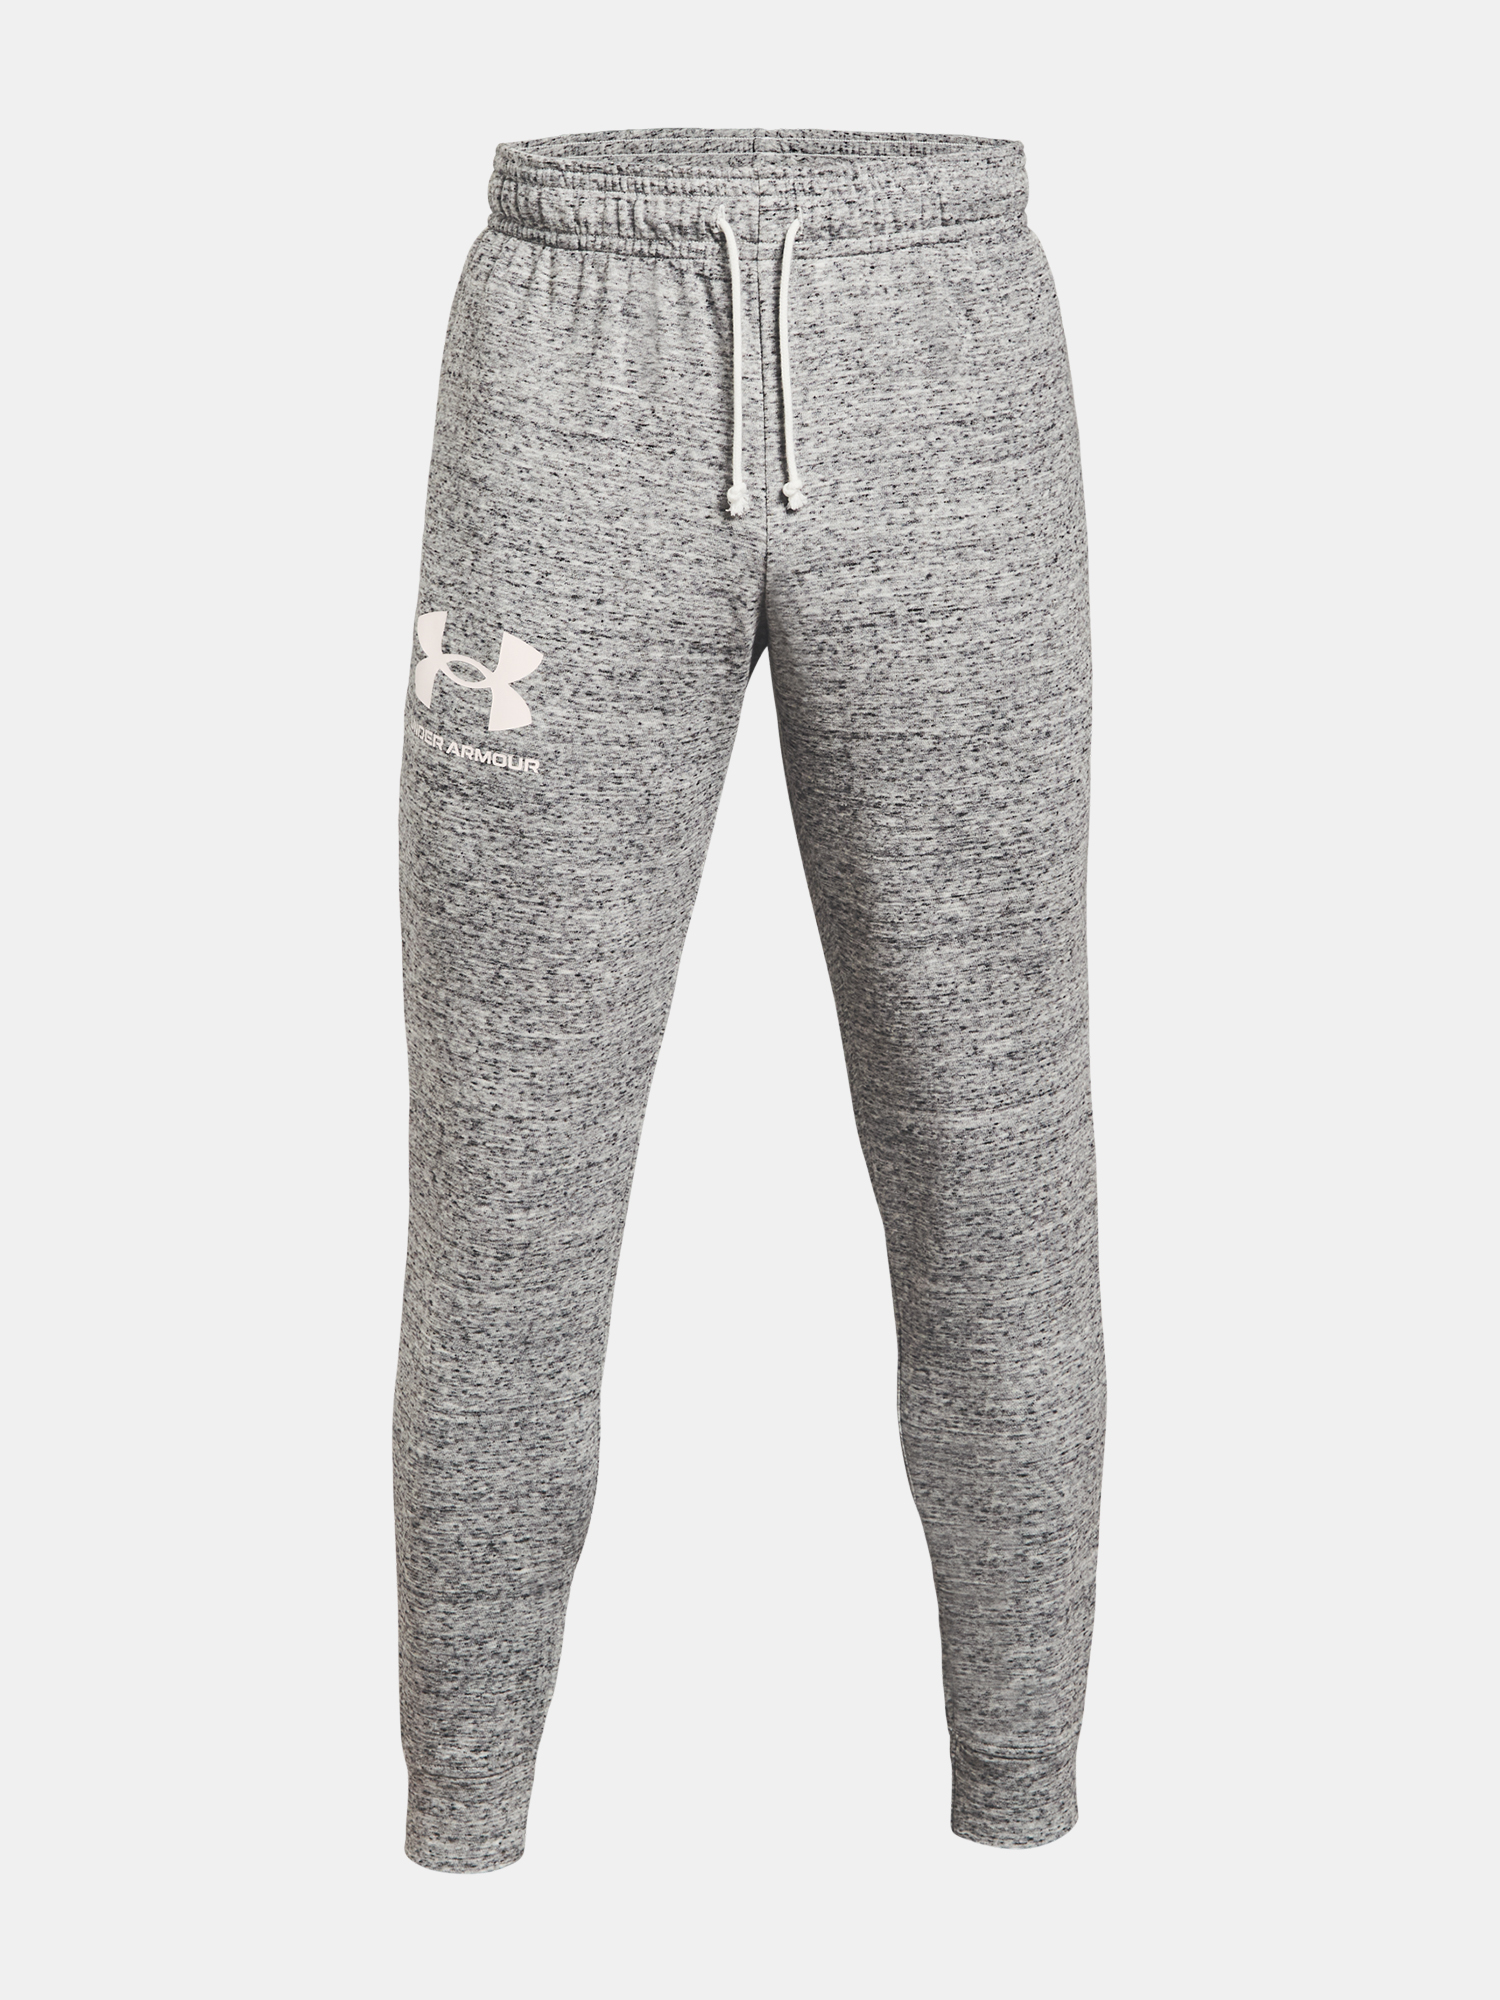 Under Armour tepláky Rival Terry Jogger white Velikost: M